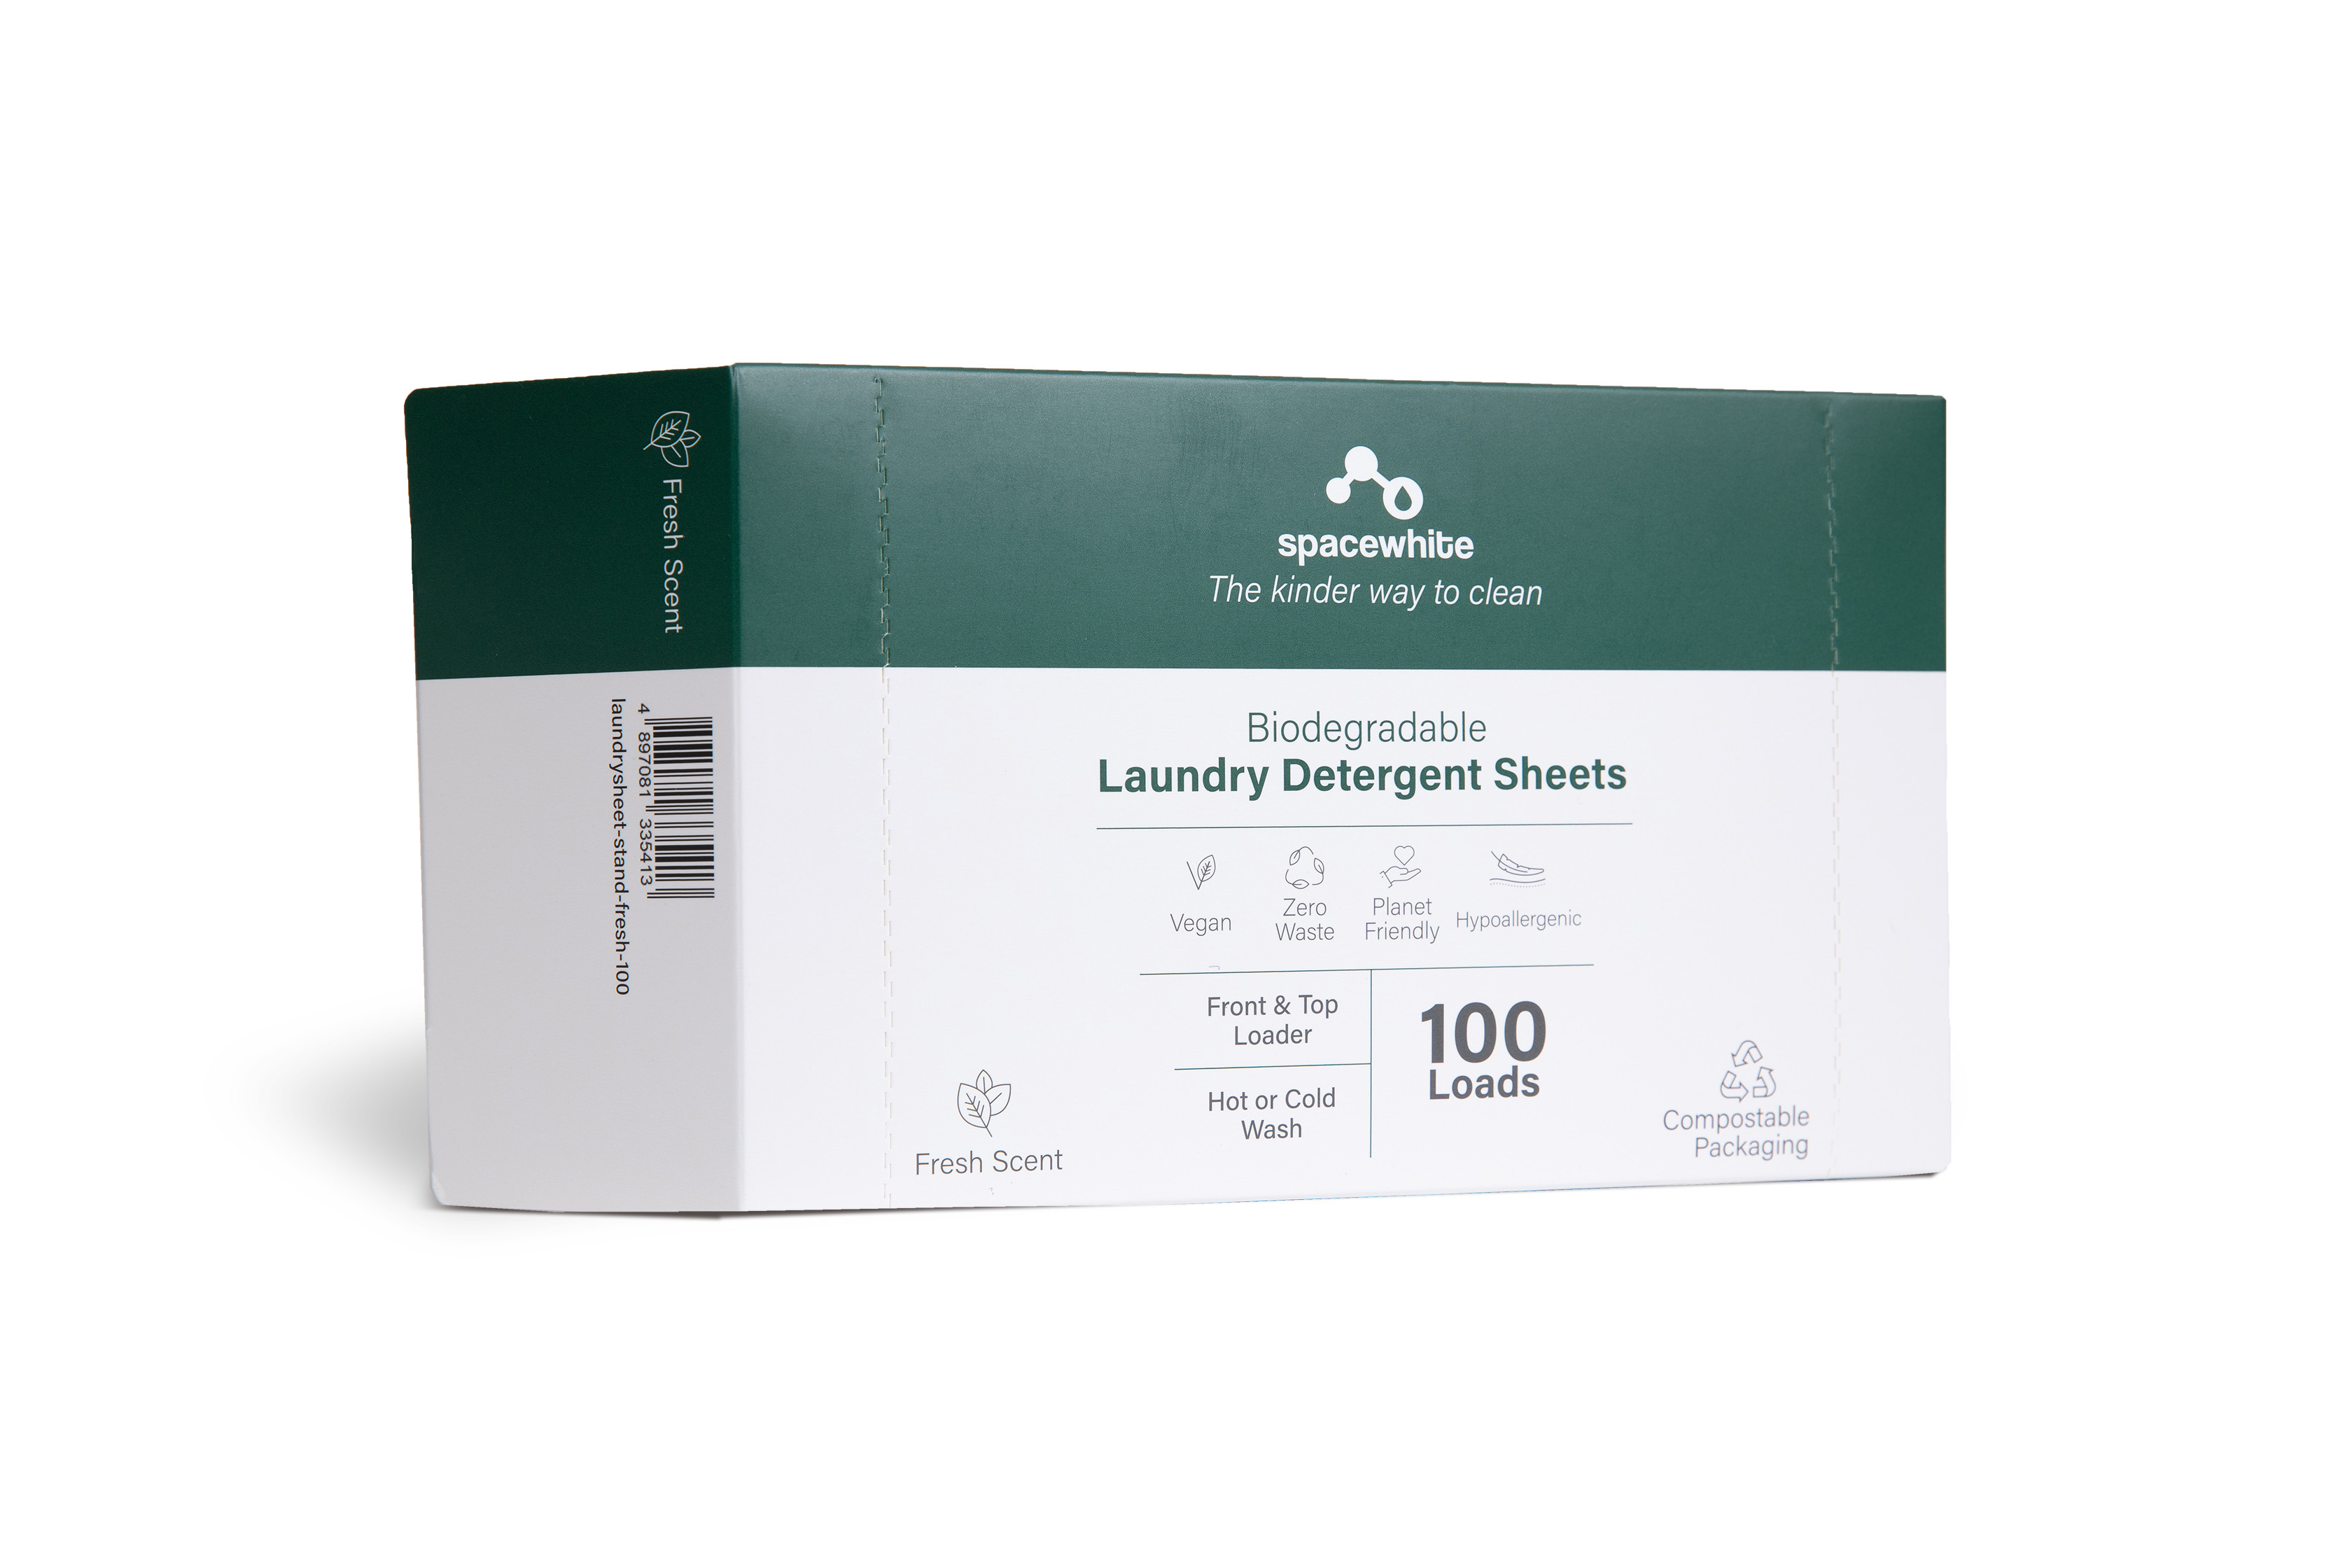 compare laundry detergent sheets